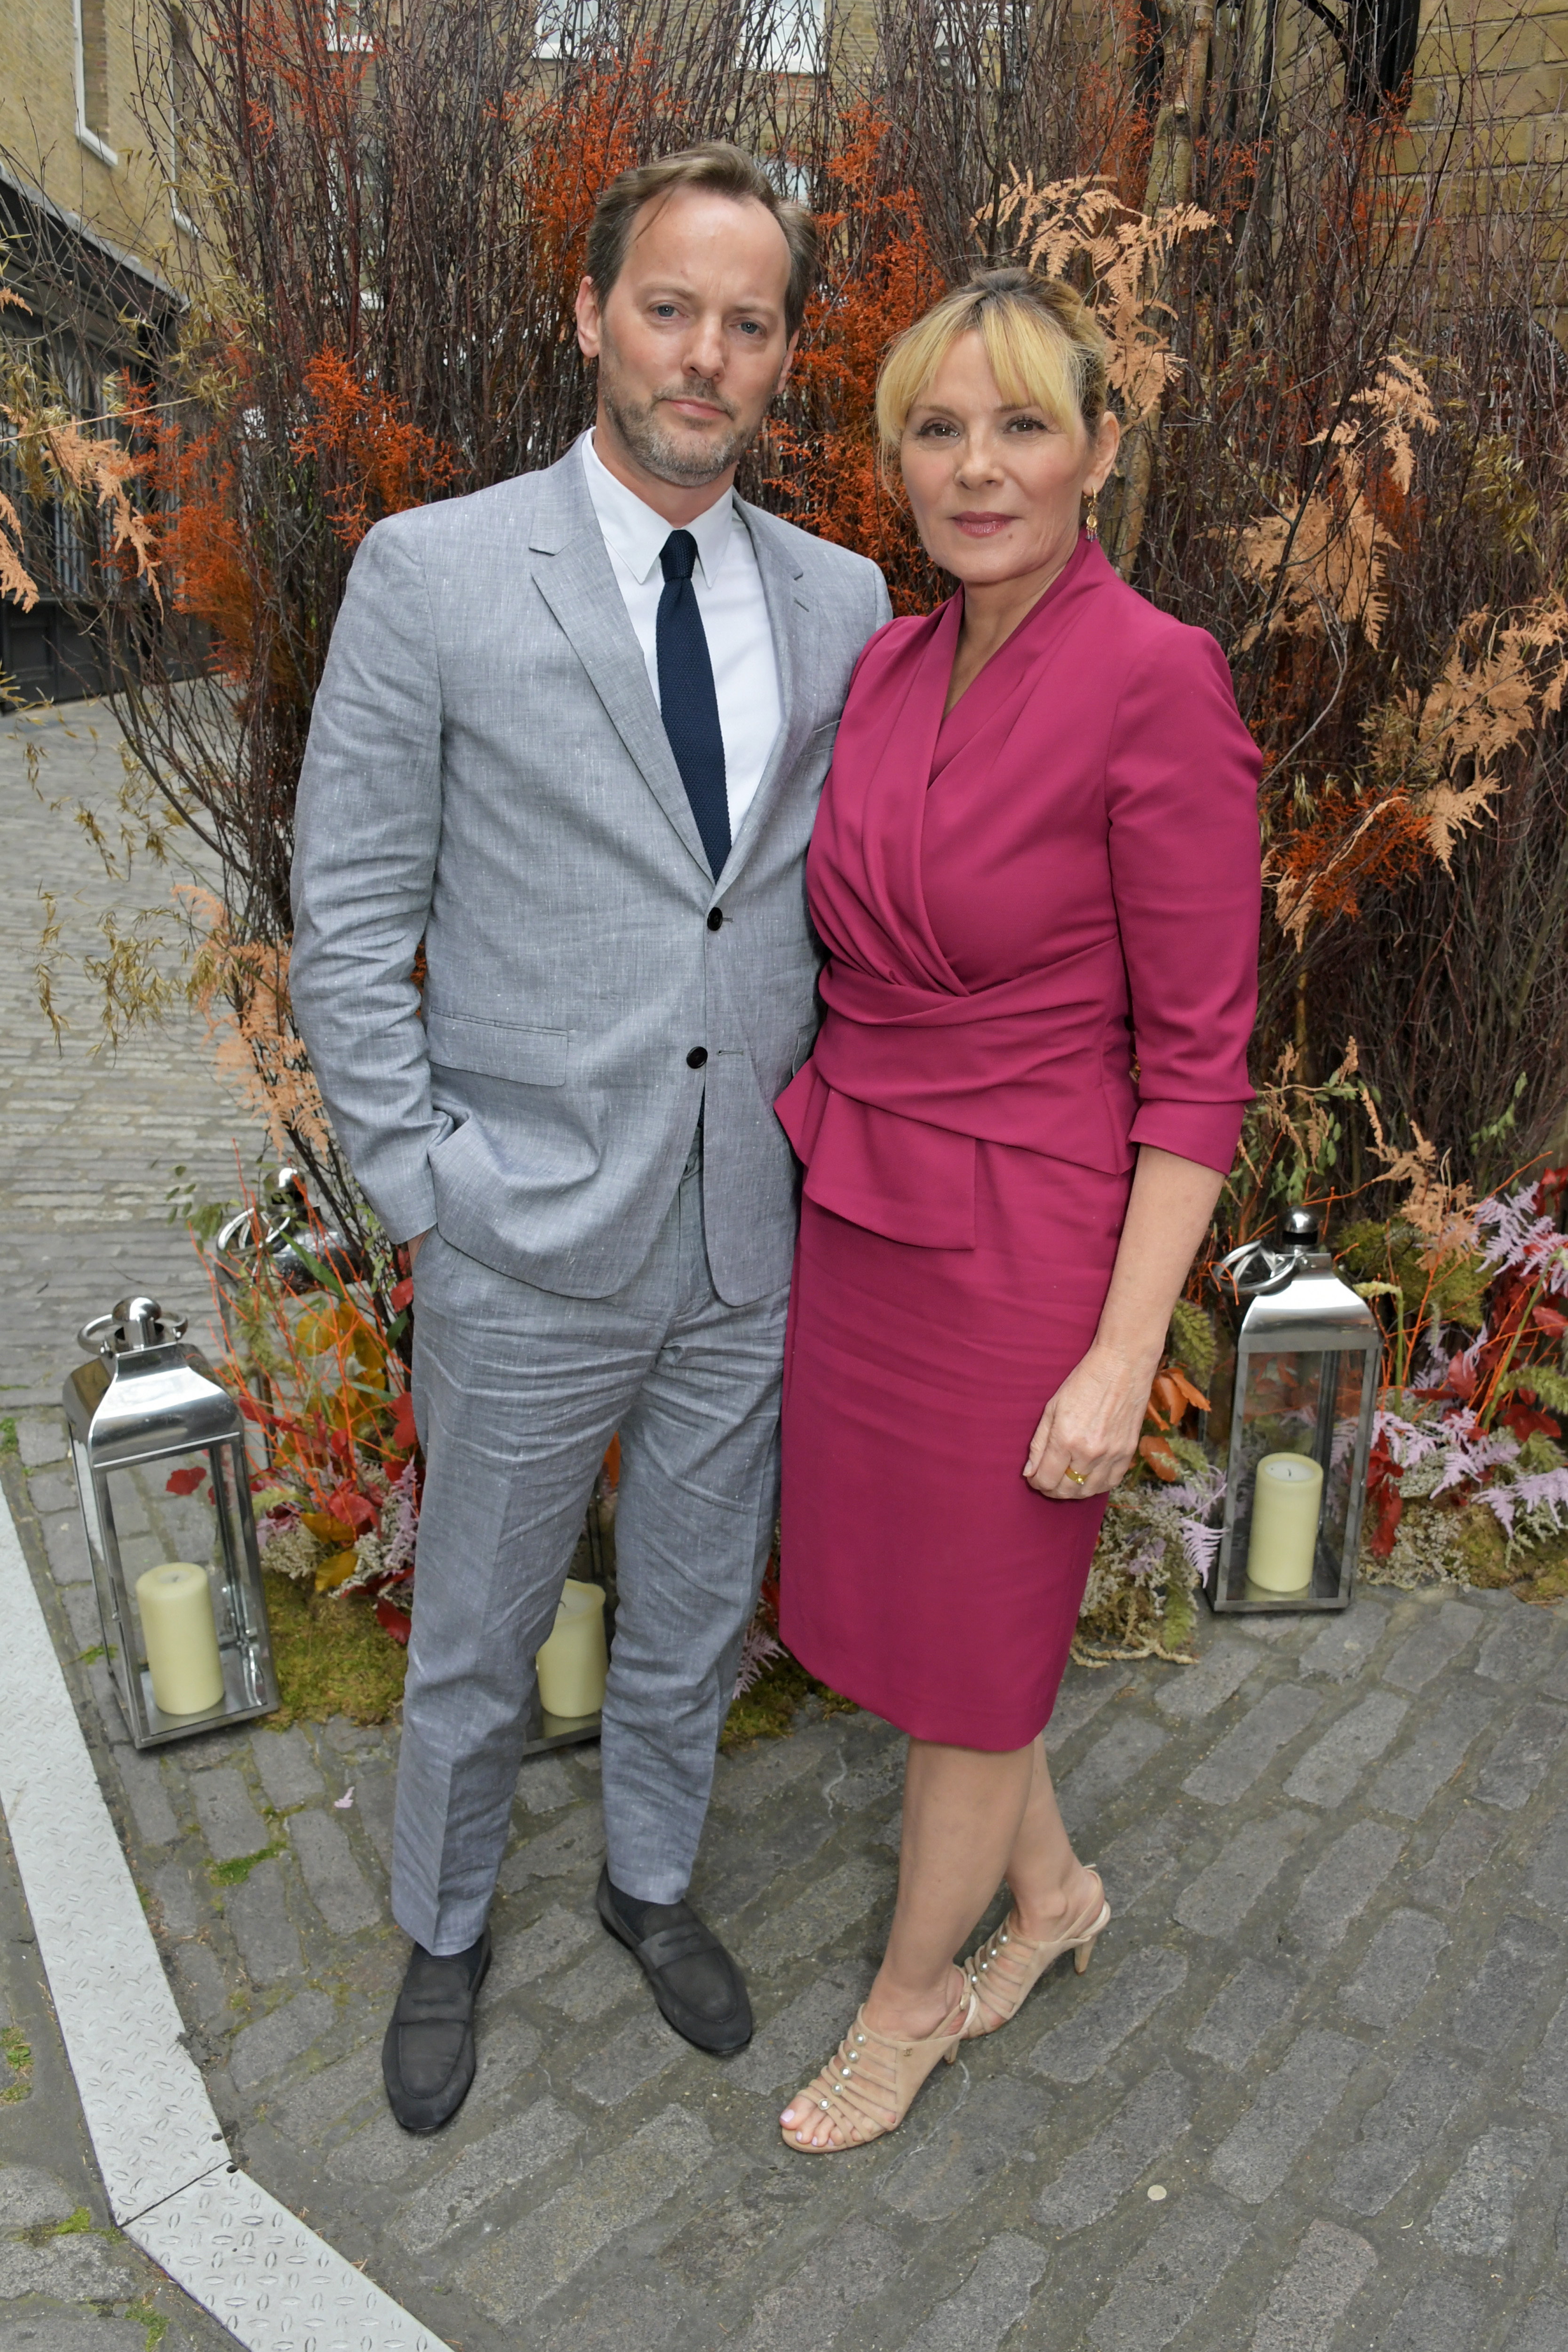 Russell Thomas and Kim Cattrall at the Midsummer Party for The Old Vic in London, England on June 23, 2019 | Source: Getty Images